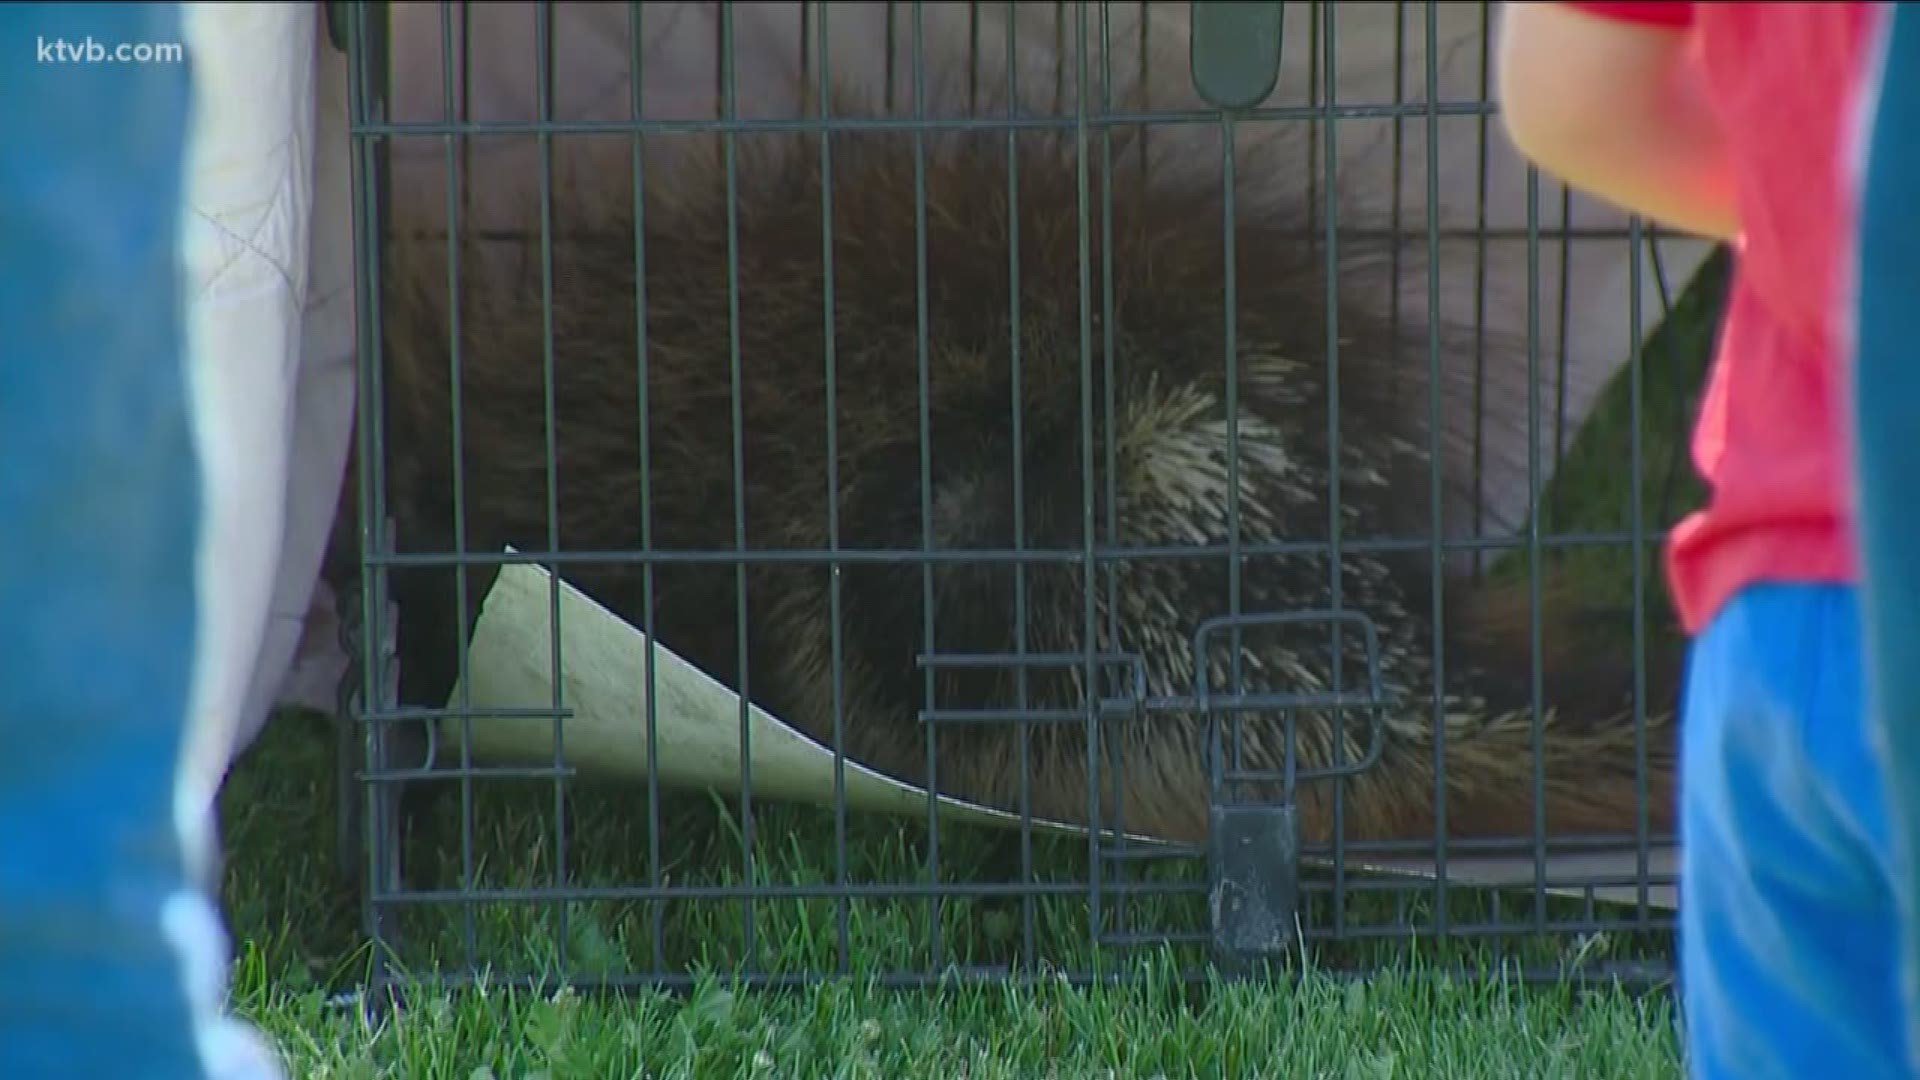 People in Council take part in the annual Fourth of July Porcupine races.